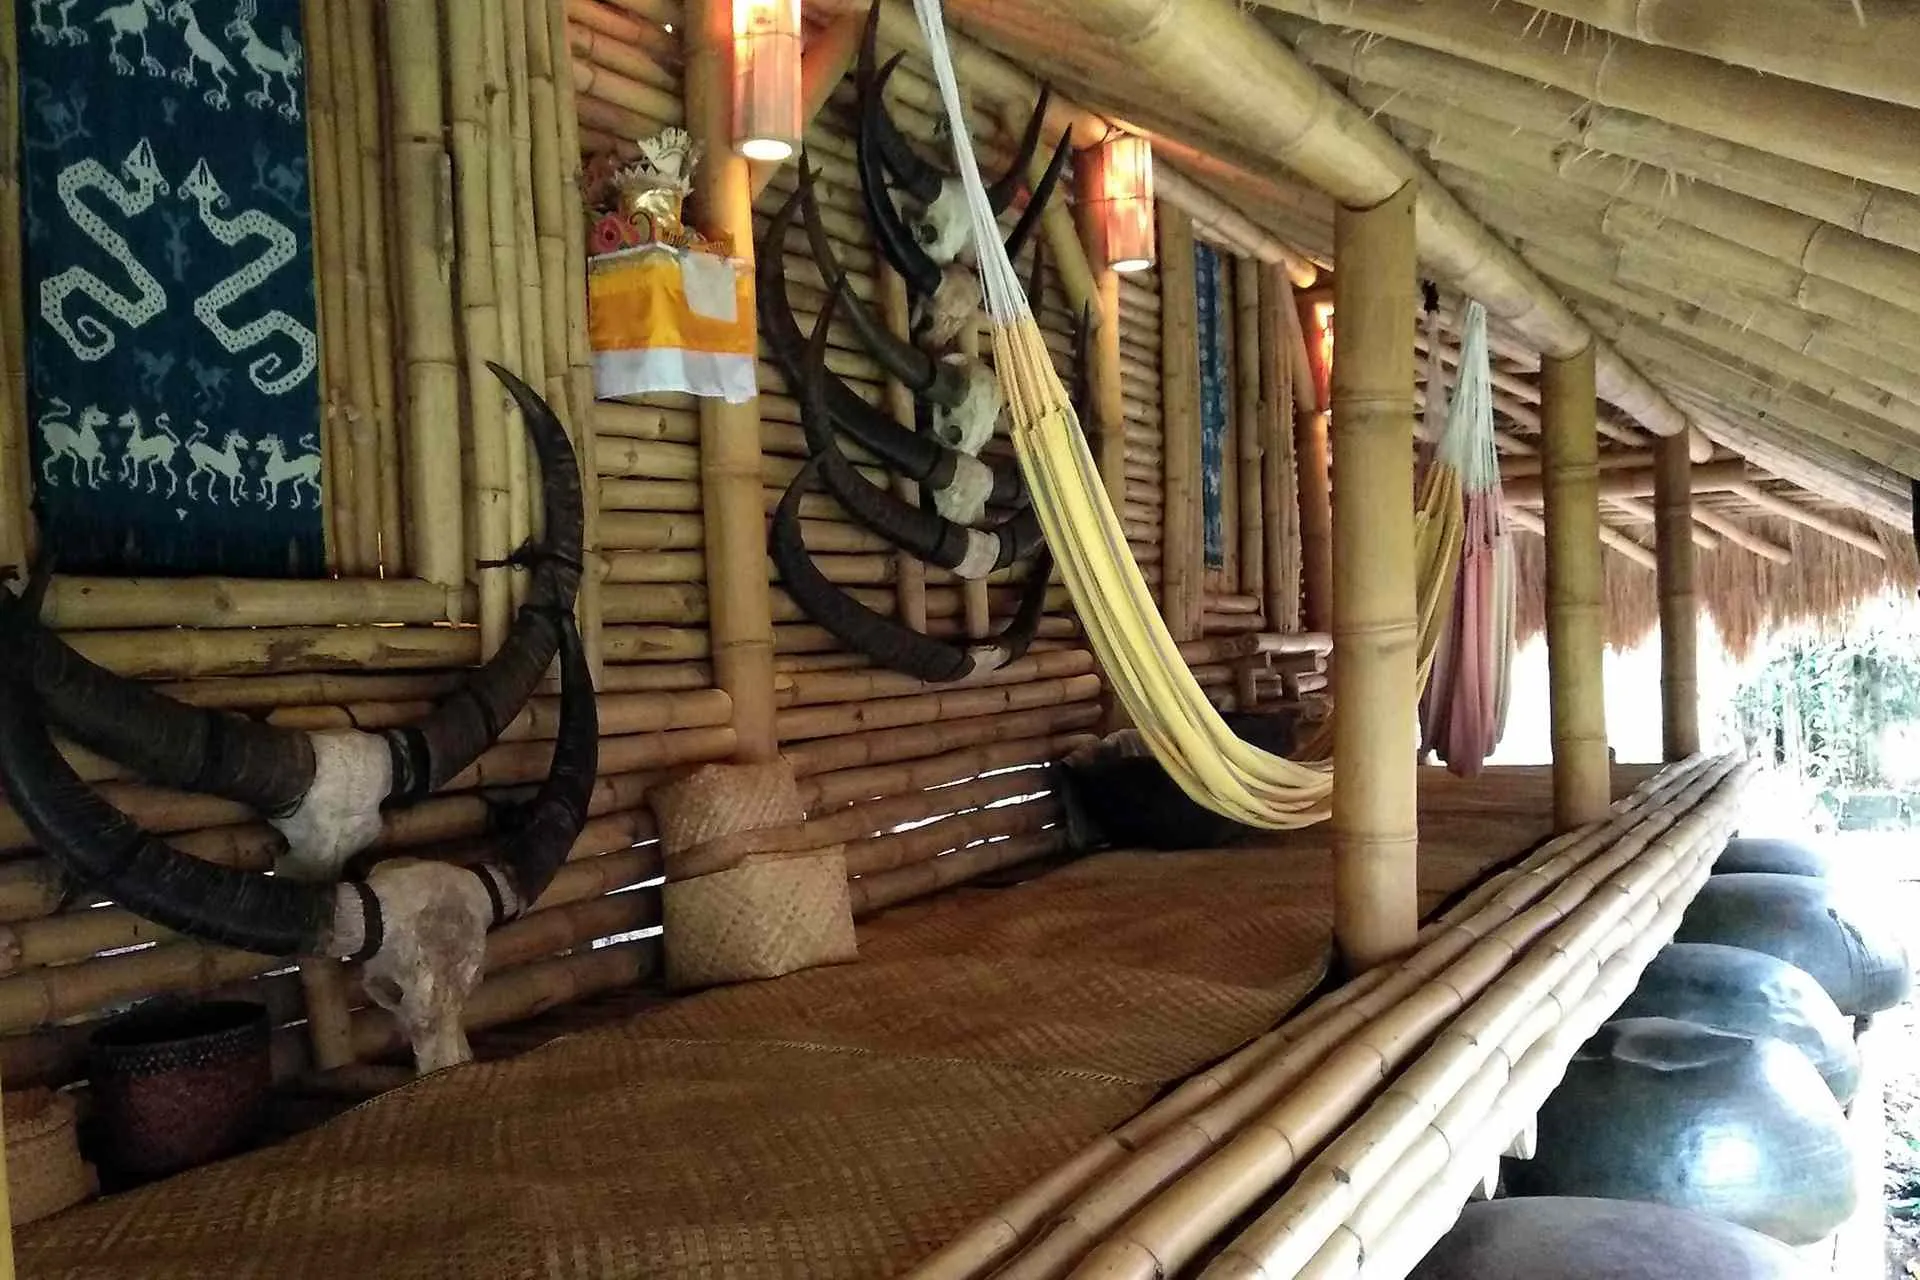 The Sumba style house. Photo by Rokma